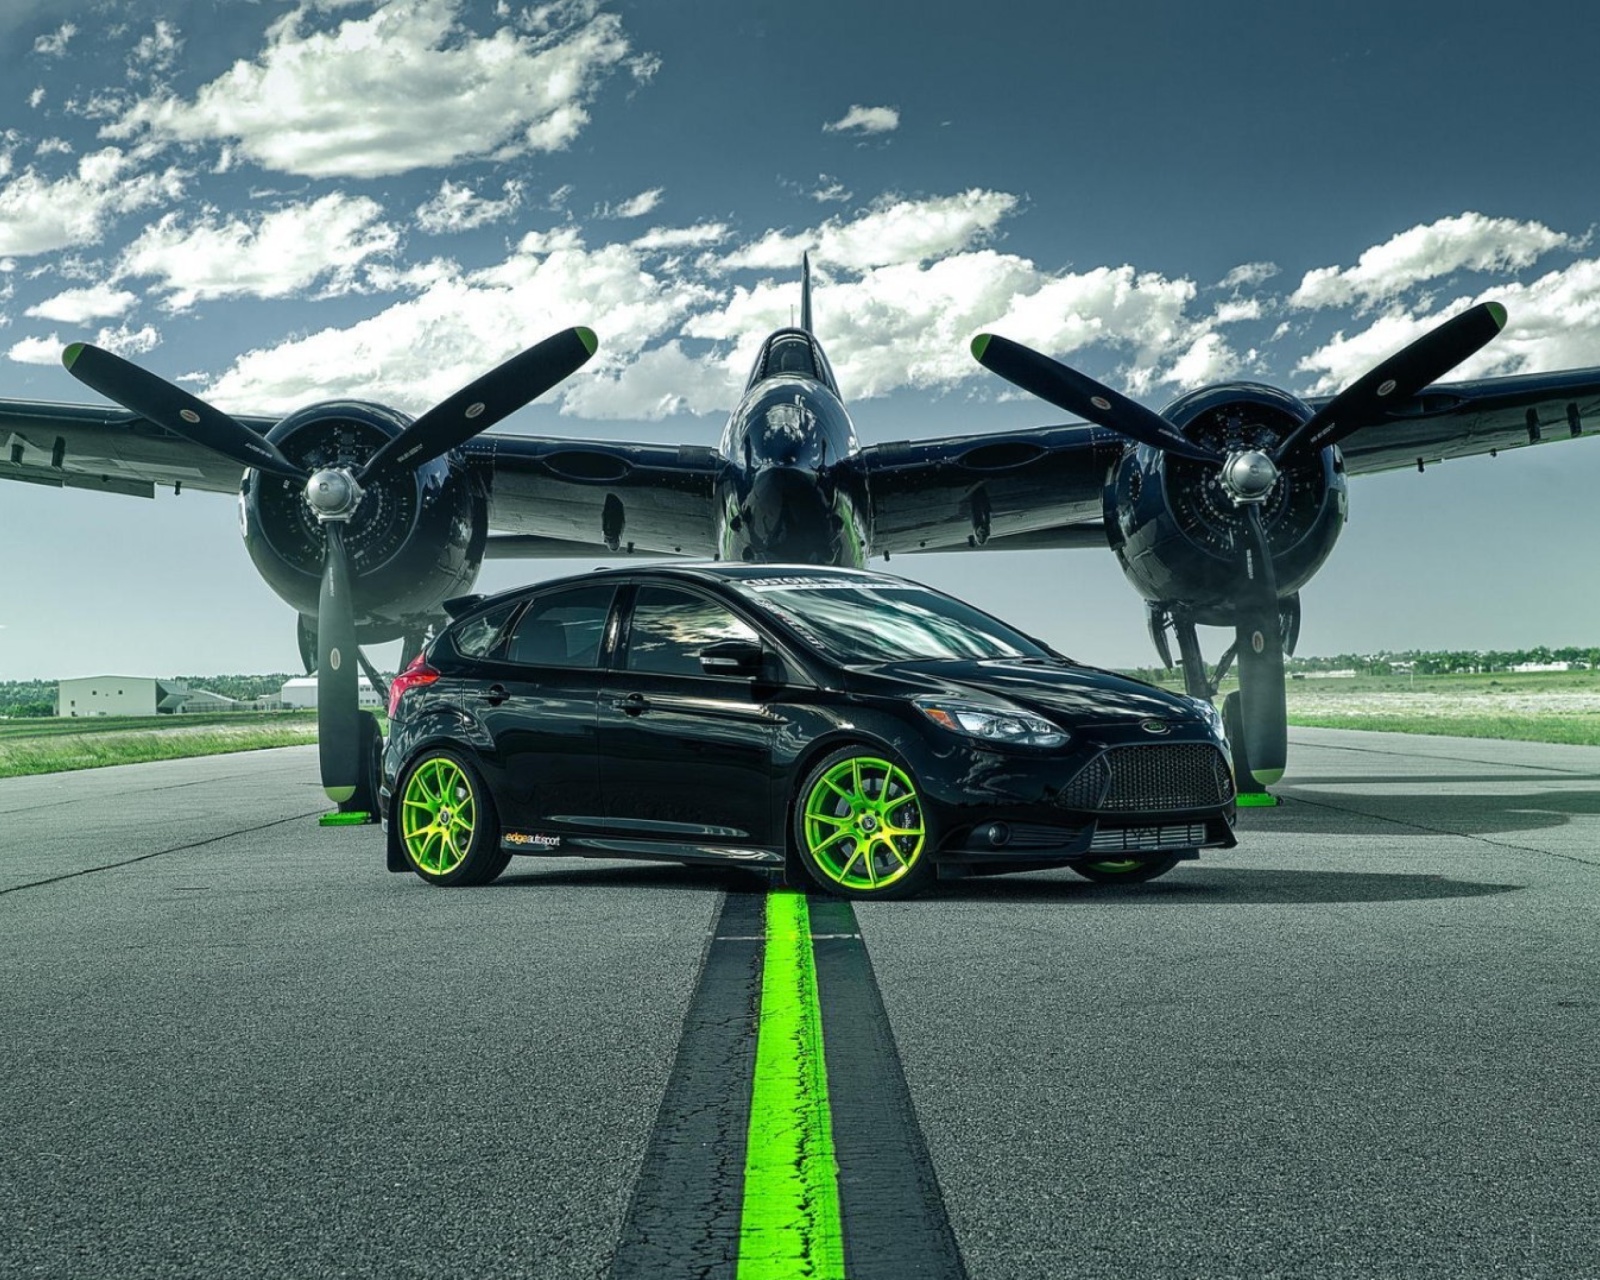 Ford Focus ST with Jet wallpaper 1600x1280